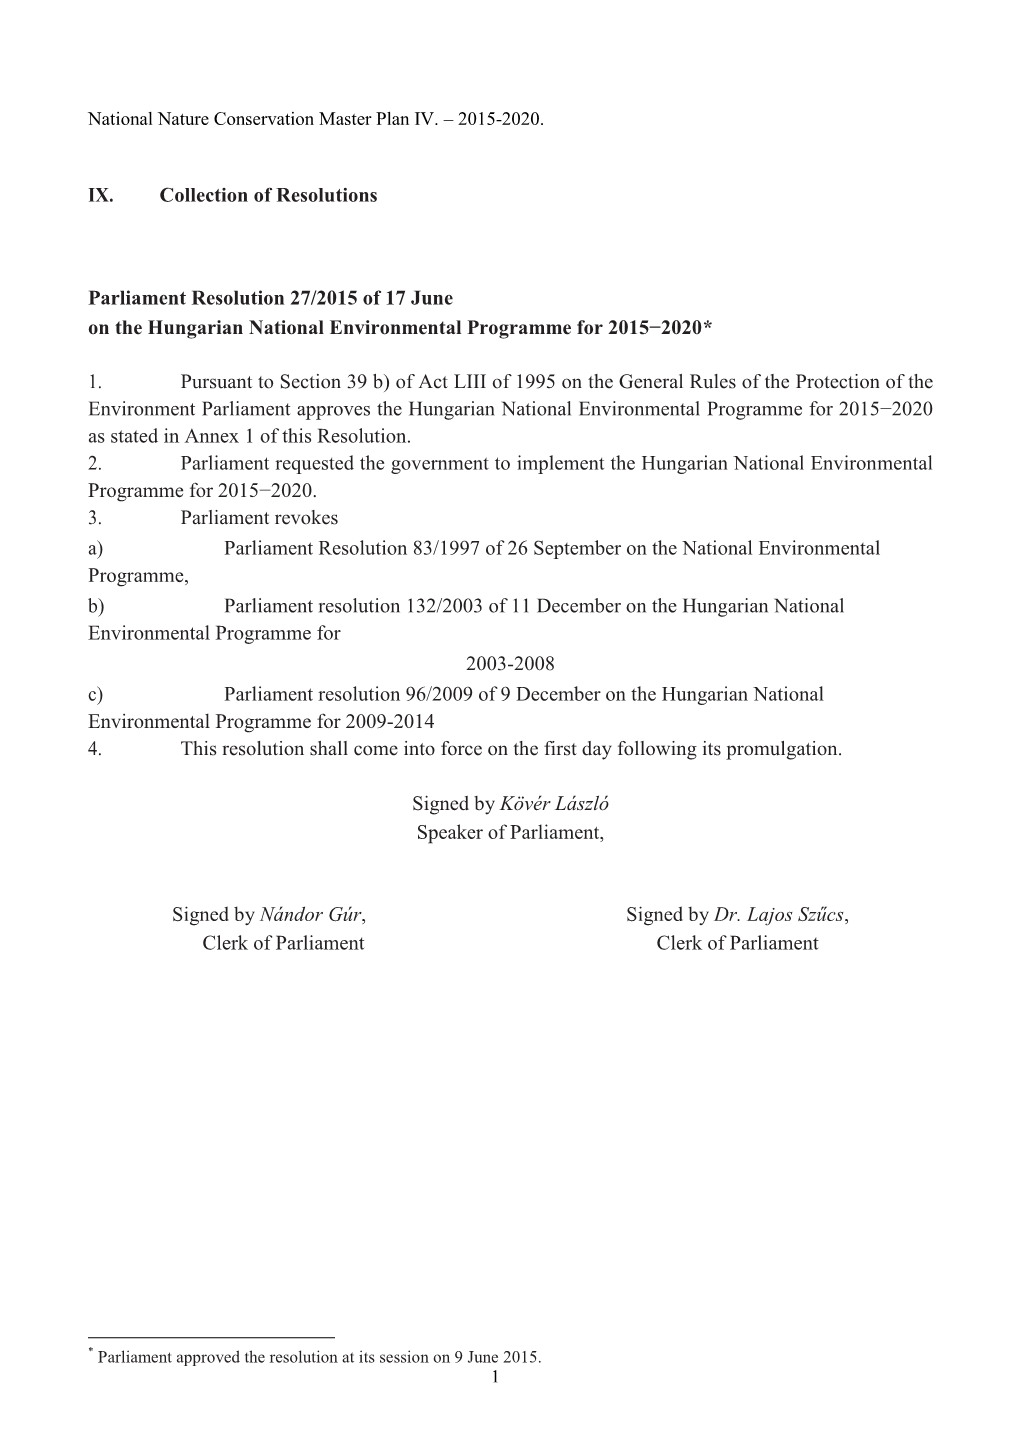 IX. Collection of Resolutions Parliament Resolution 27/2015 Of